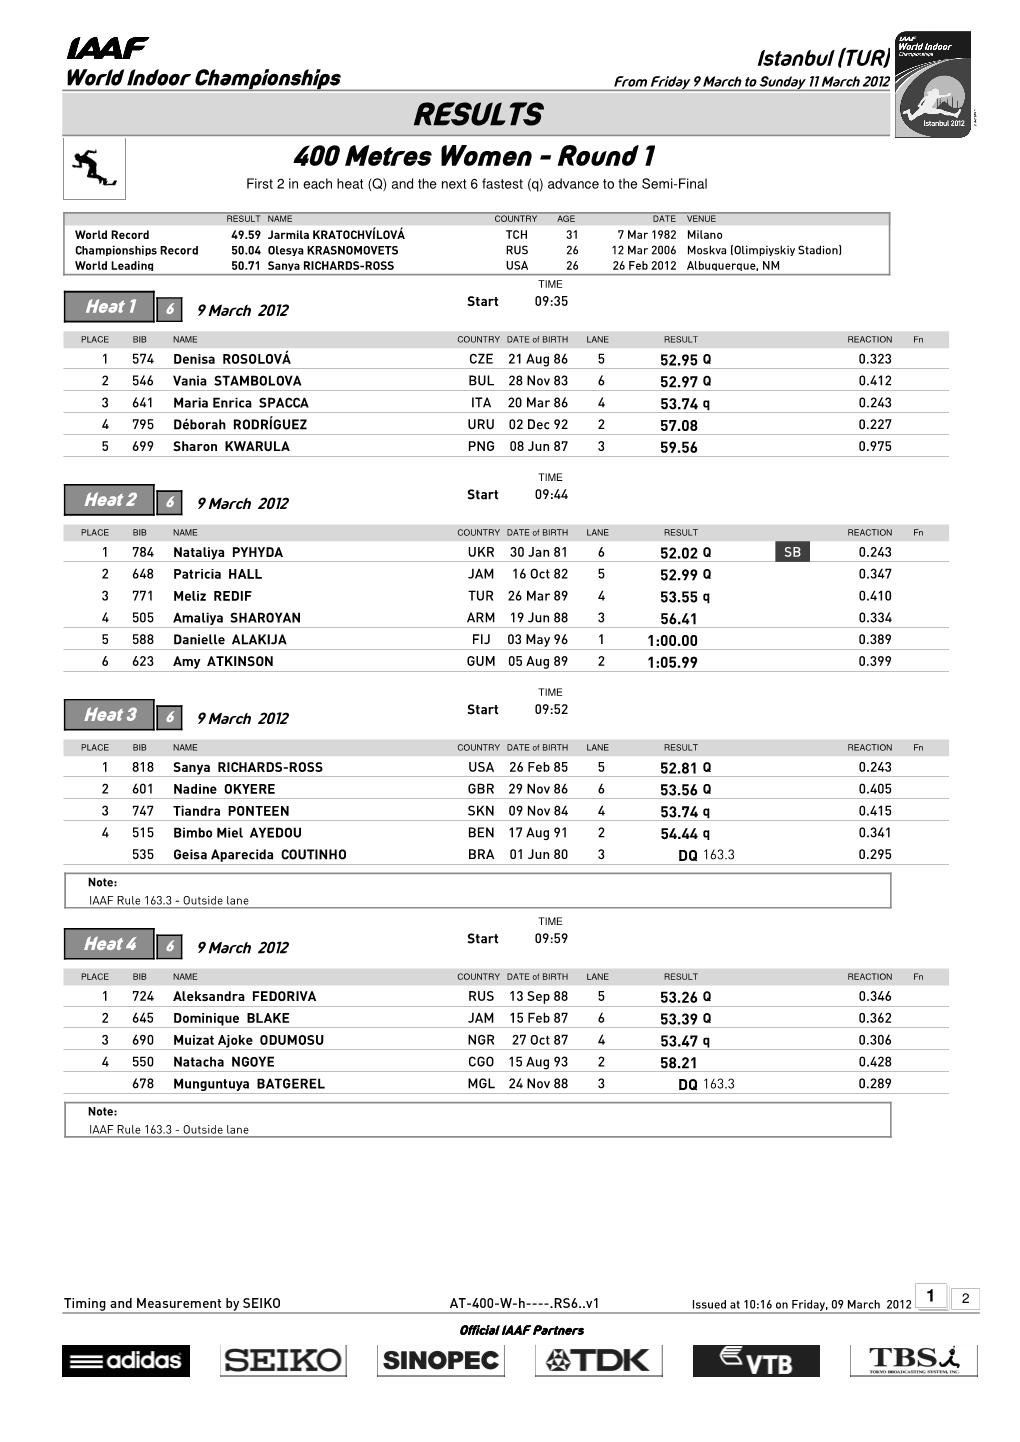 RESULTS 400 Metres Women - Round 1 First 2 in Each Heat (Q) and the Next 6 Fastest (Q) Advance to the Semi-Final